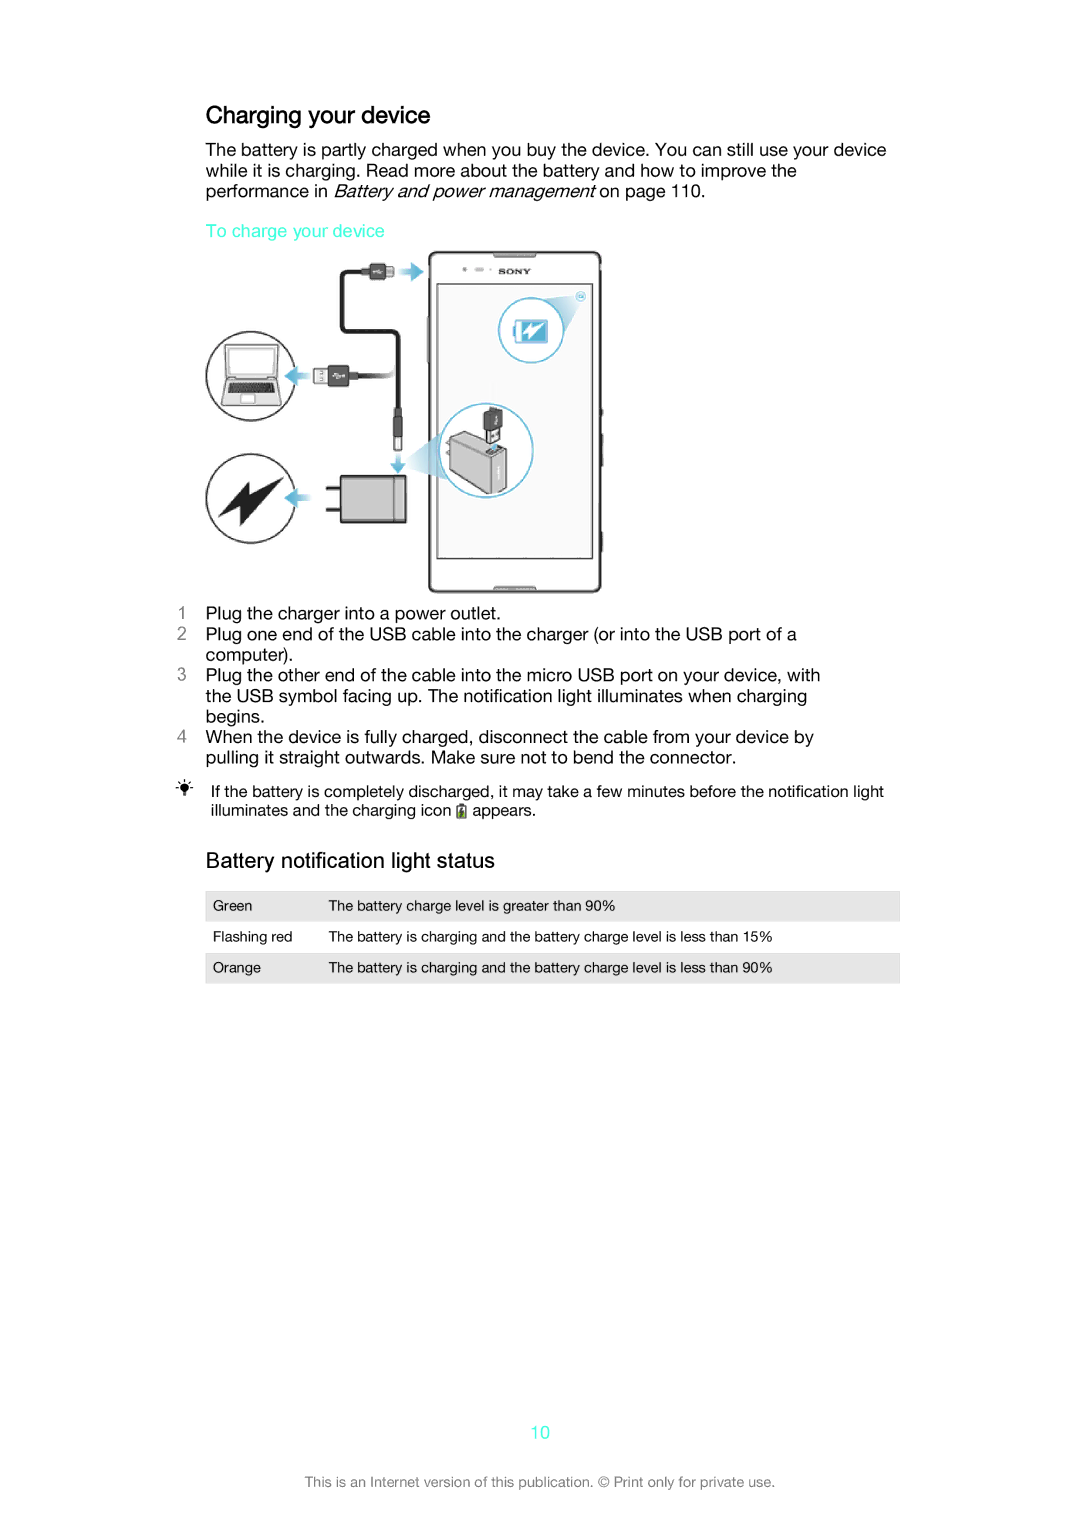 Sony D5322 manual Charging your device, Battery notification light status, To charge your device 